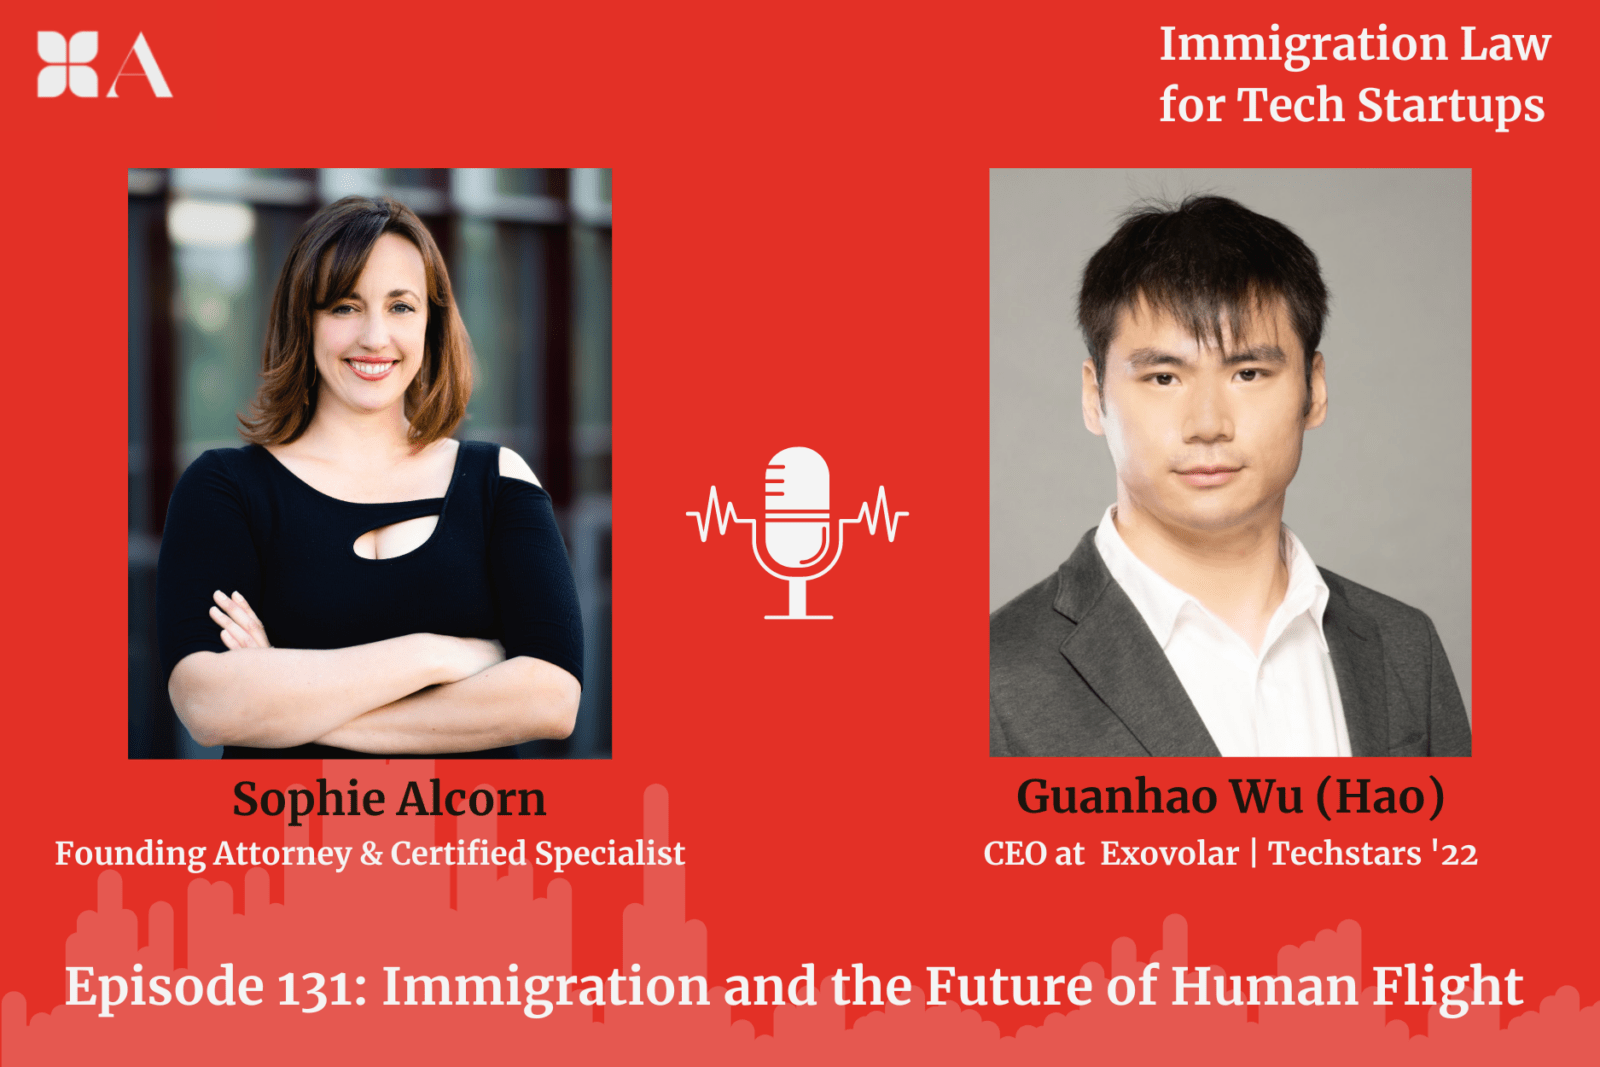 Immigration and the Future of Human Flight with Guanhao Wu